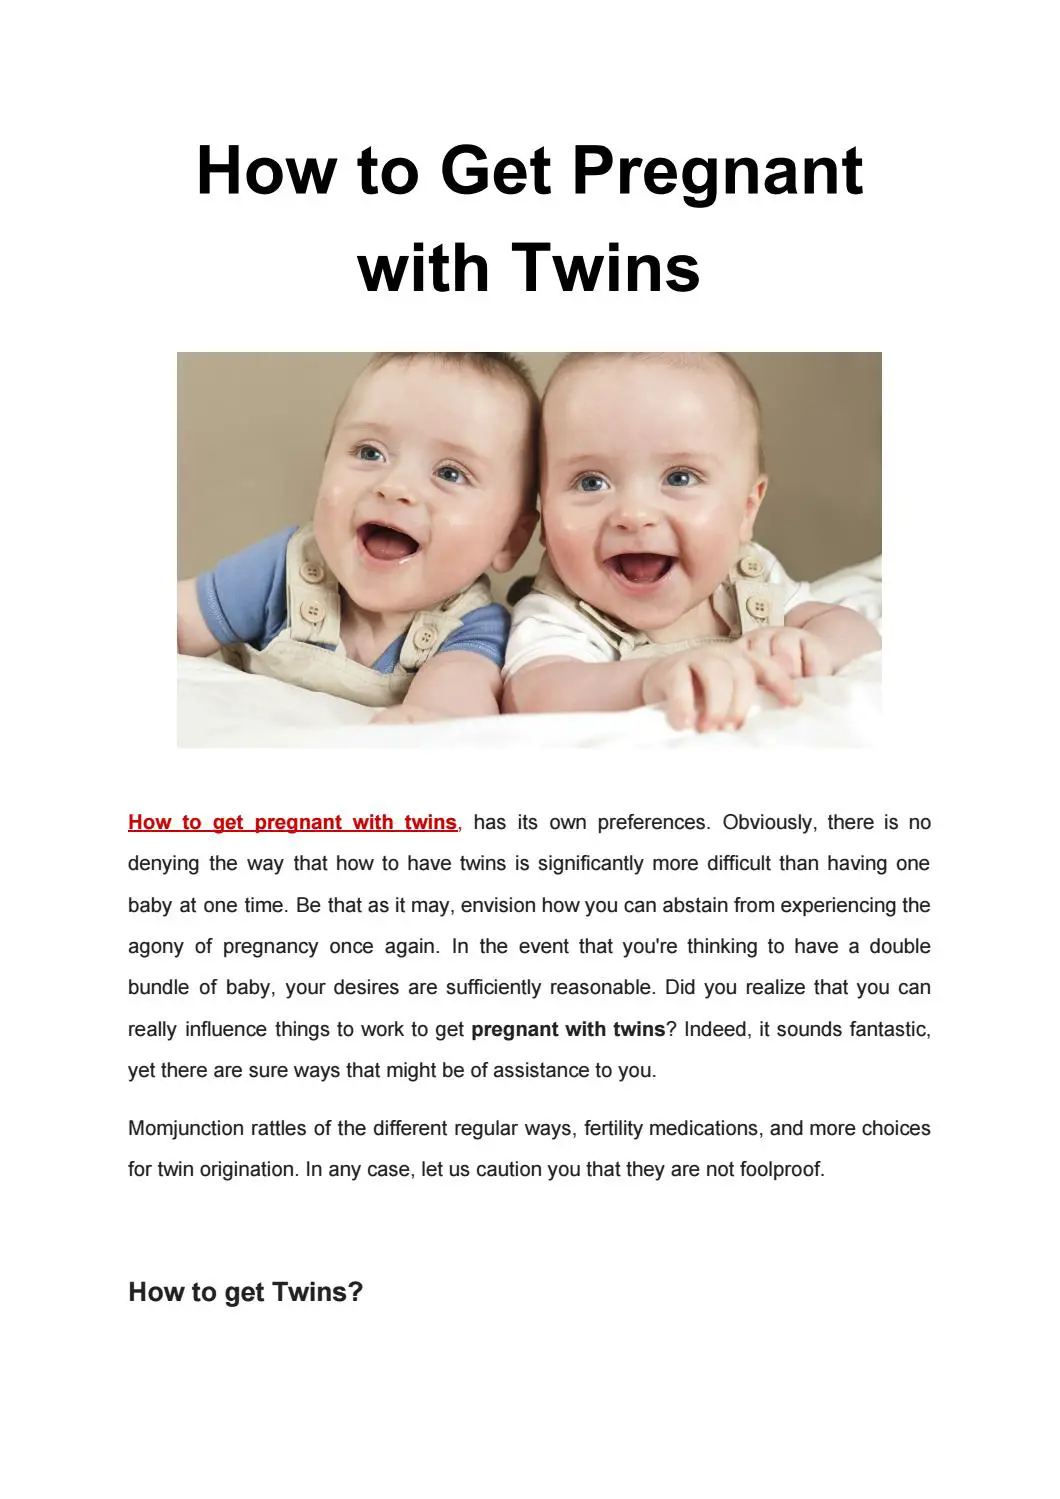 How to get pregnant with twins by Luma Love